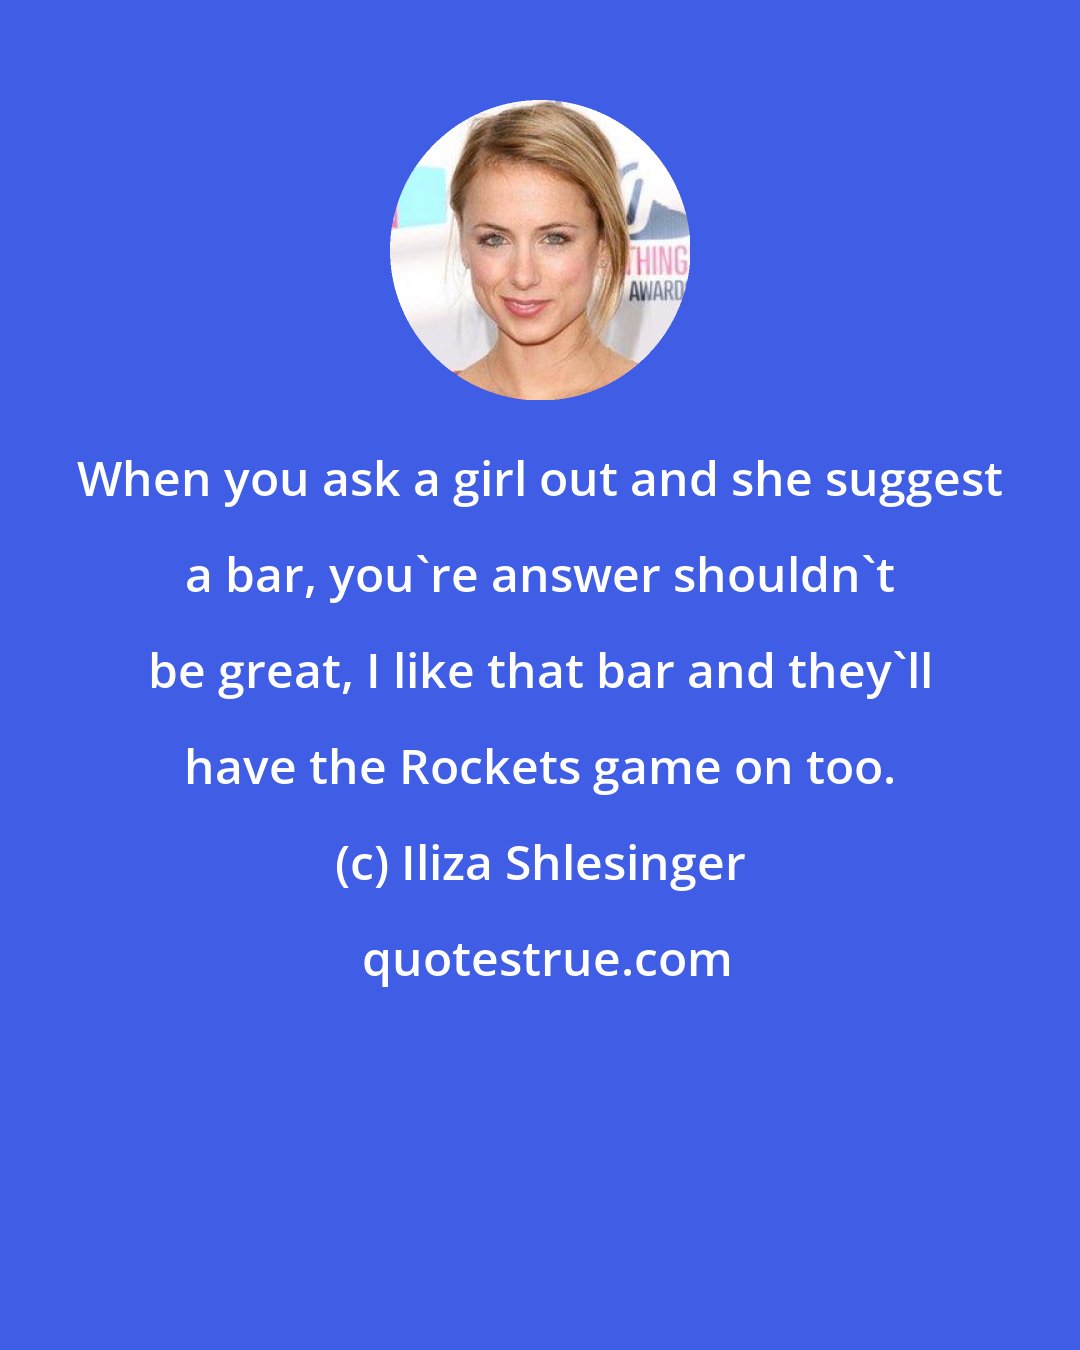 Iliza Shlesinger: When you ask a girl out and she suggest a bar, you're answer shouldn't be great, I like that bar and they'll have the Rockets game on too.